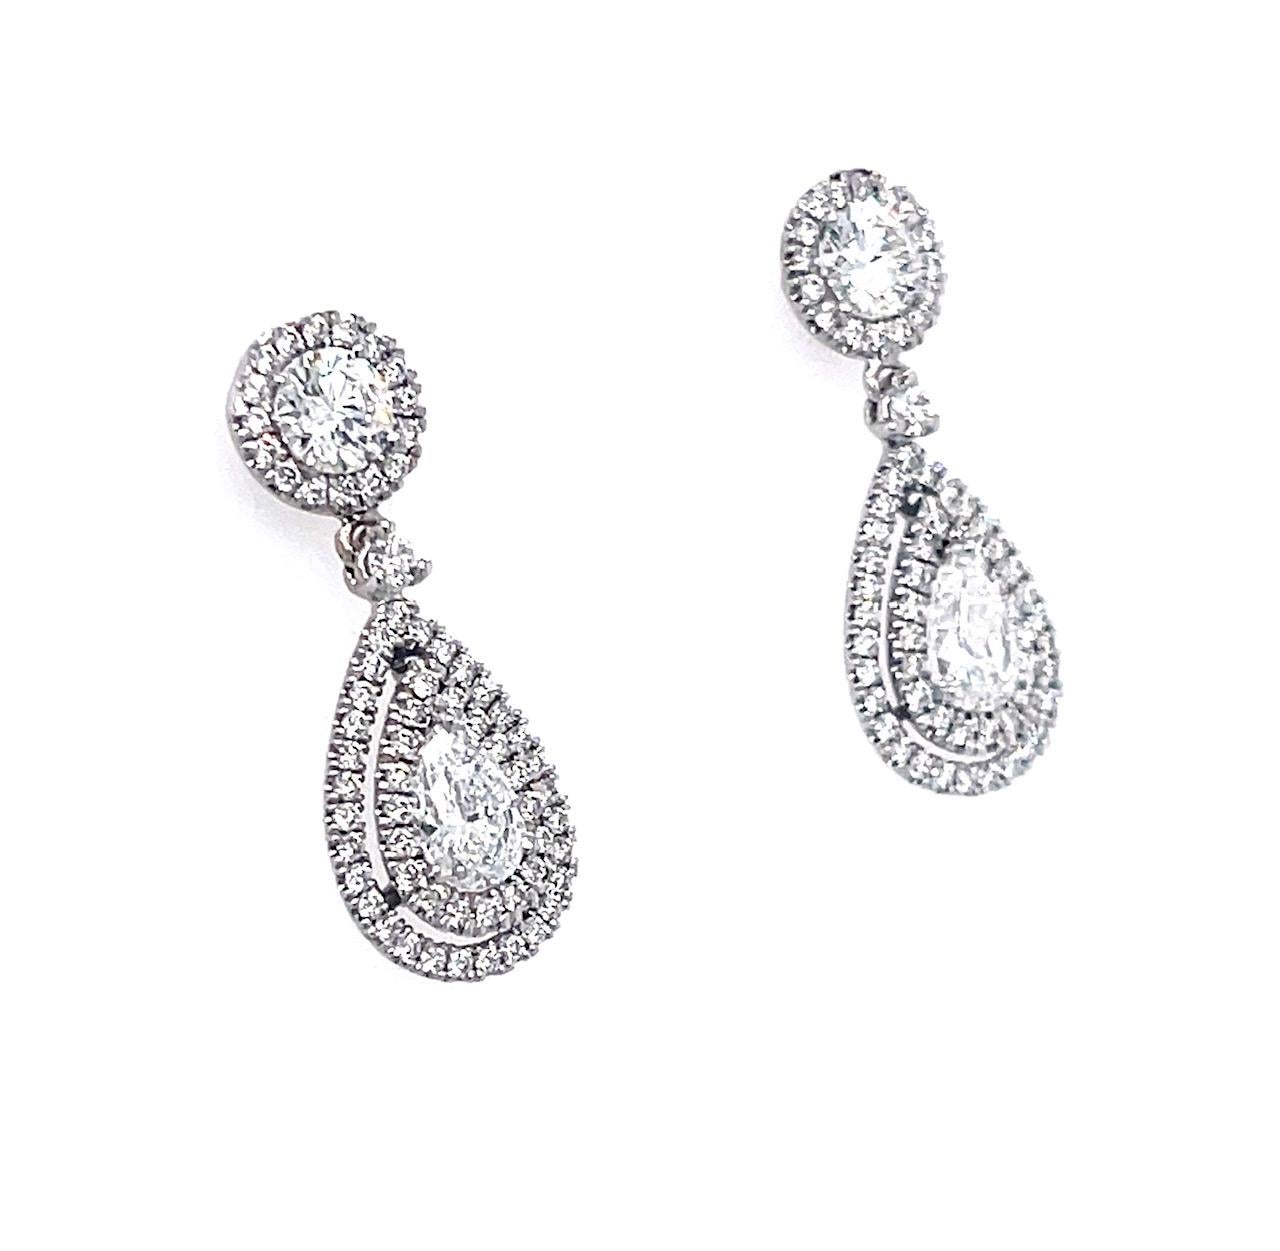 Diamond Round and Pear shape Dangle Earrings 18K White Gold

Pear shape weighs 0.40 carat E Color SI2 Clarity

With Stuller Certificate # 214444

Pear shape weighs 0.41 carat D Color SI2 Clarity

With GIA Certificate # 2151535002

Round Brilliant